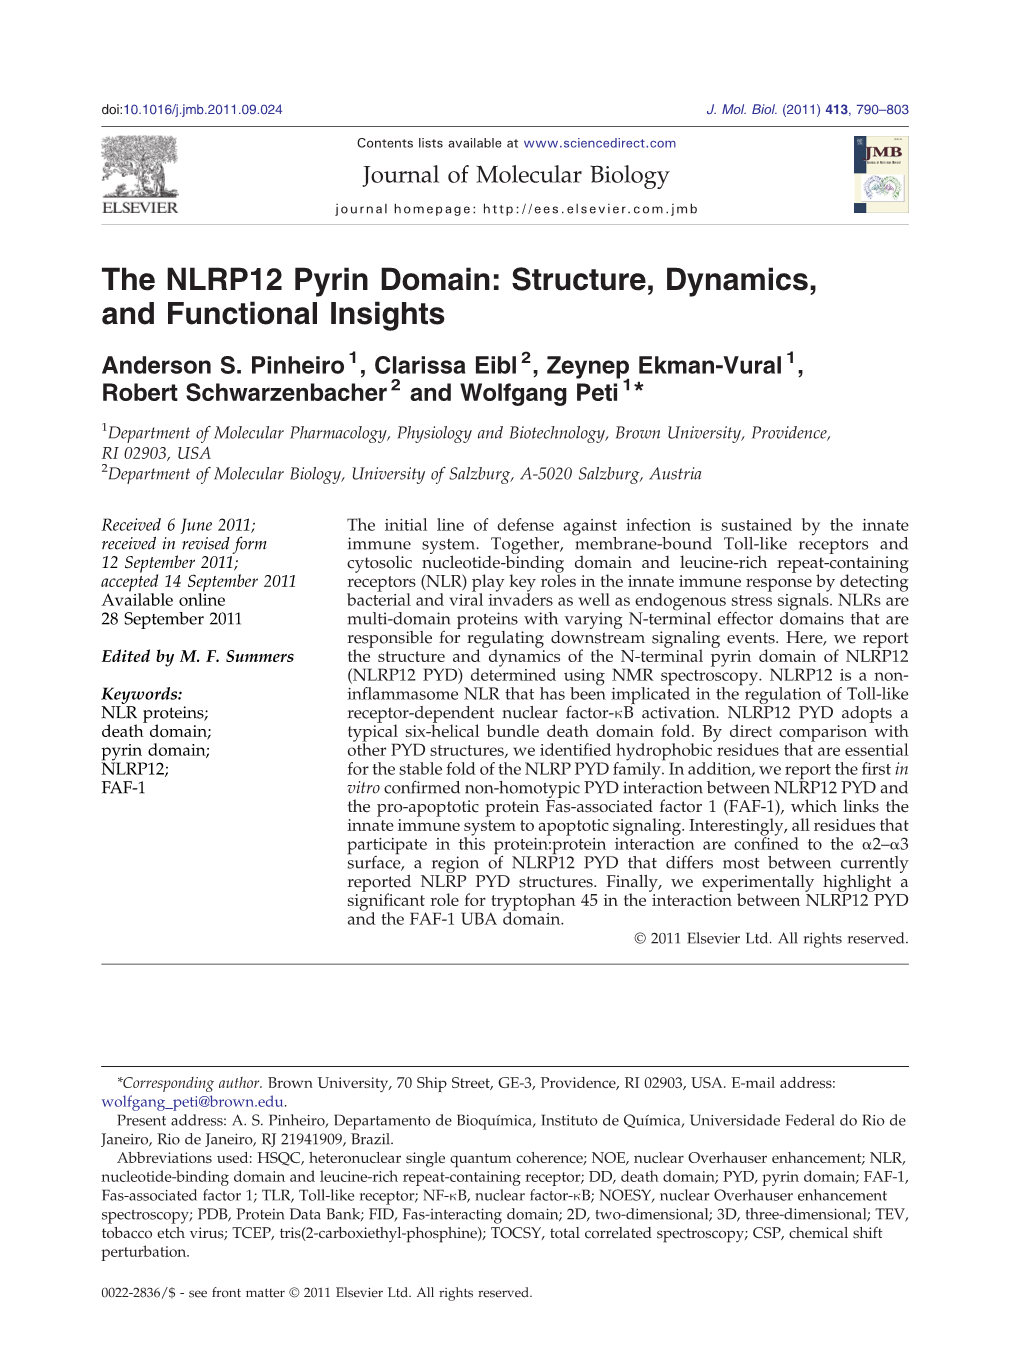 The NLRP12 Pyrin Domain: Structure, Dynamics, and Functional Insights